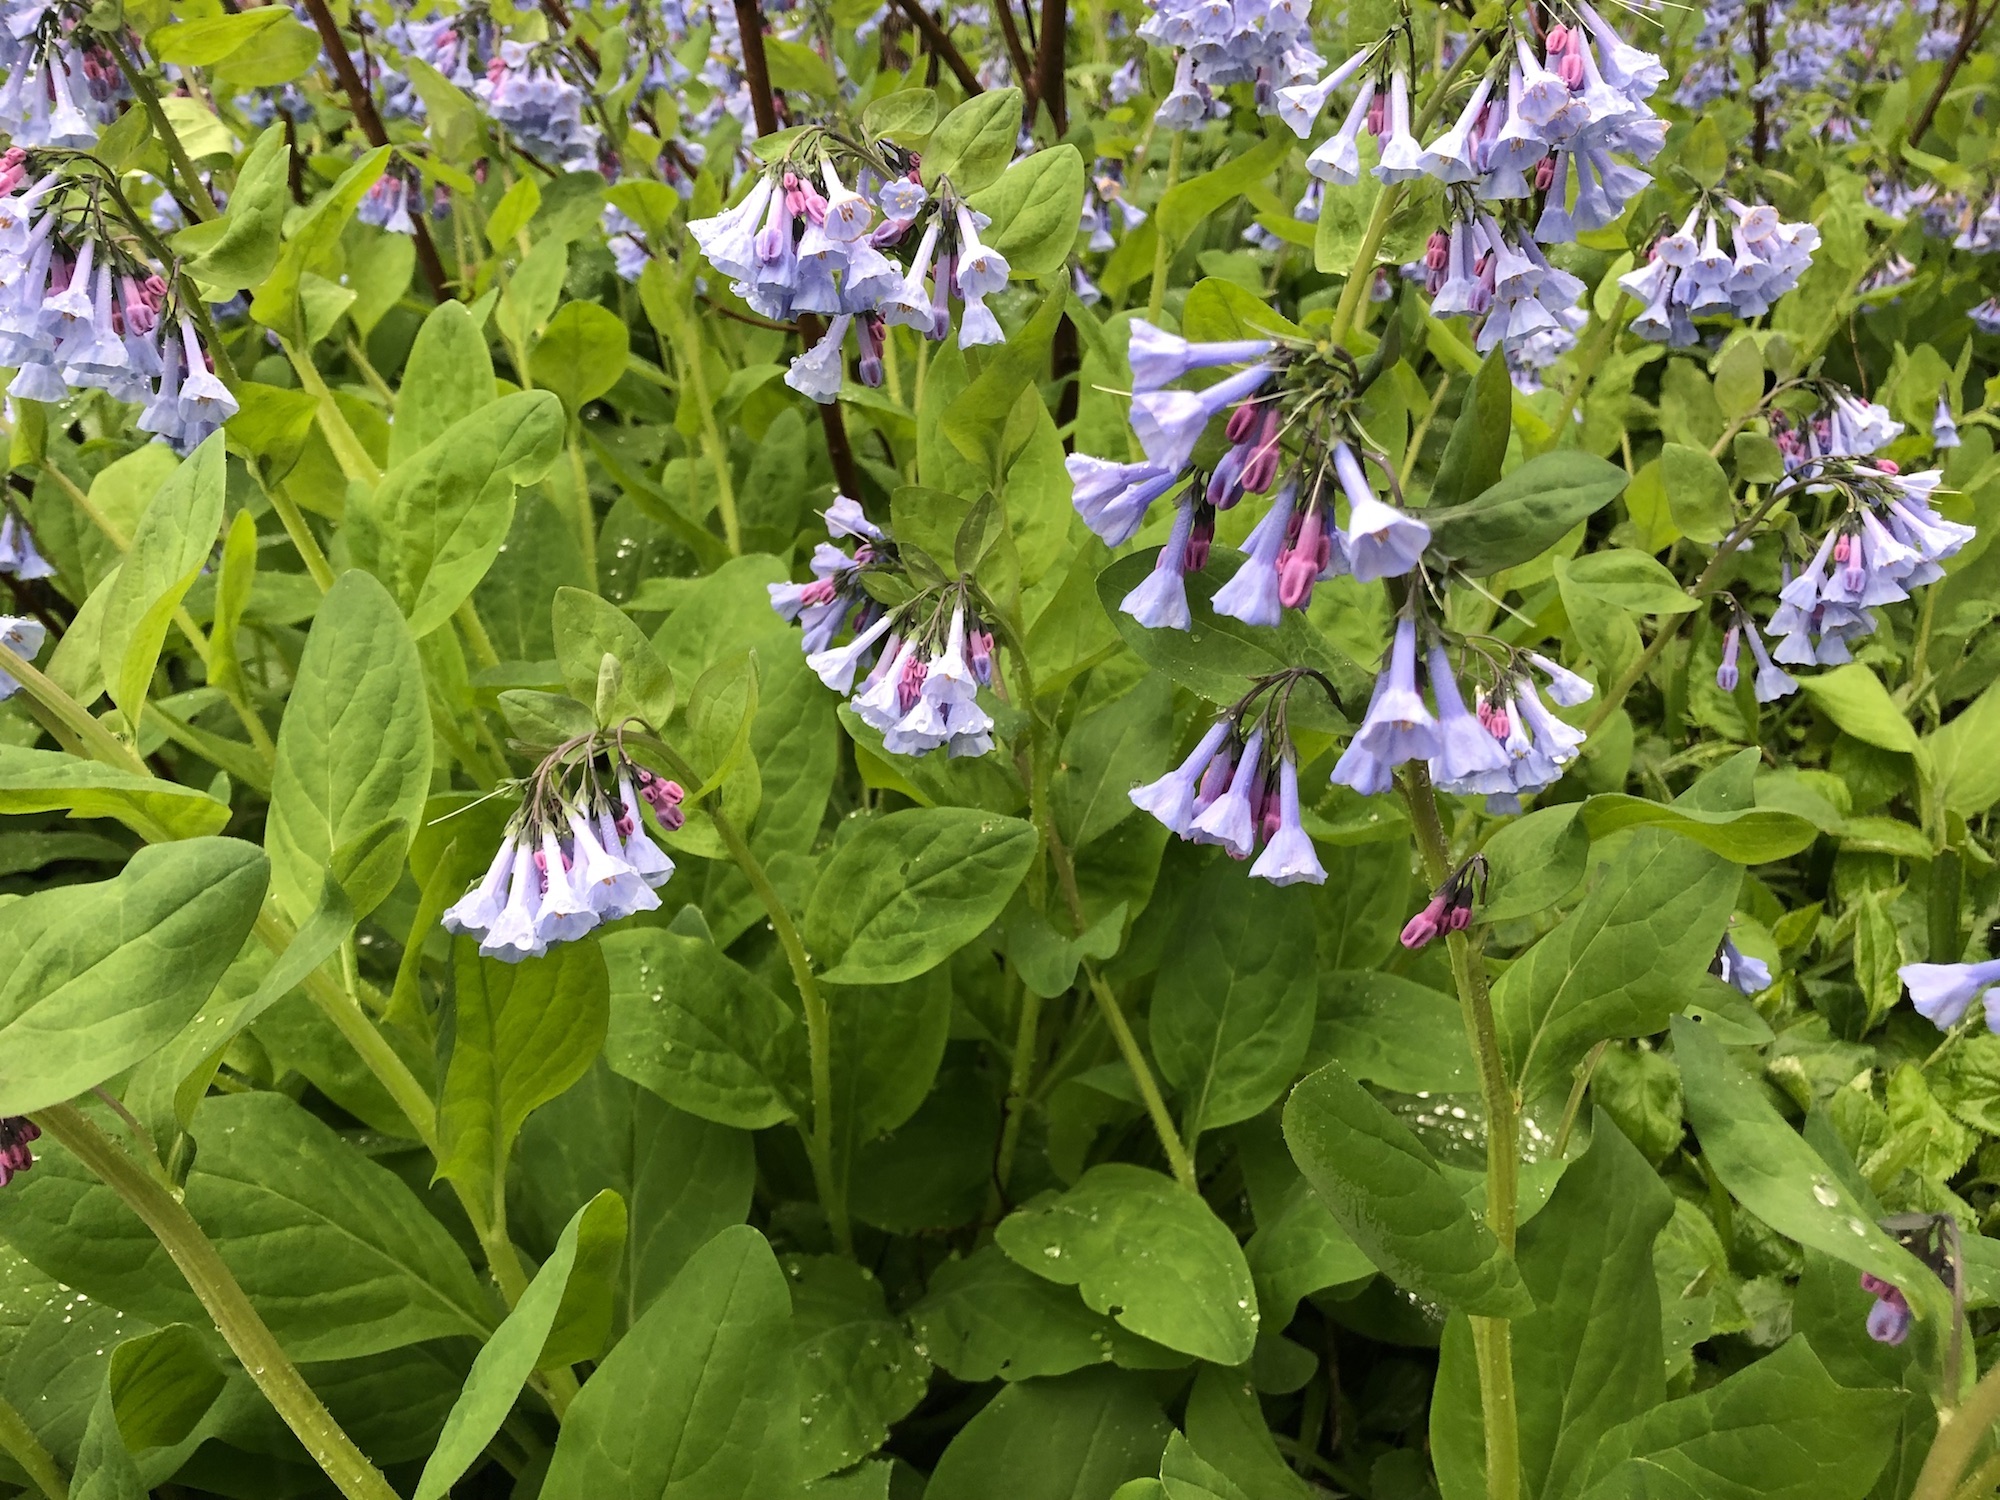 Virginia Bluebells around the Duck Pond on May 6, 2019.